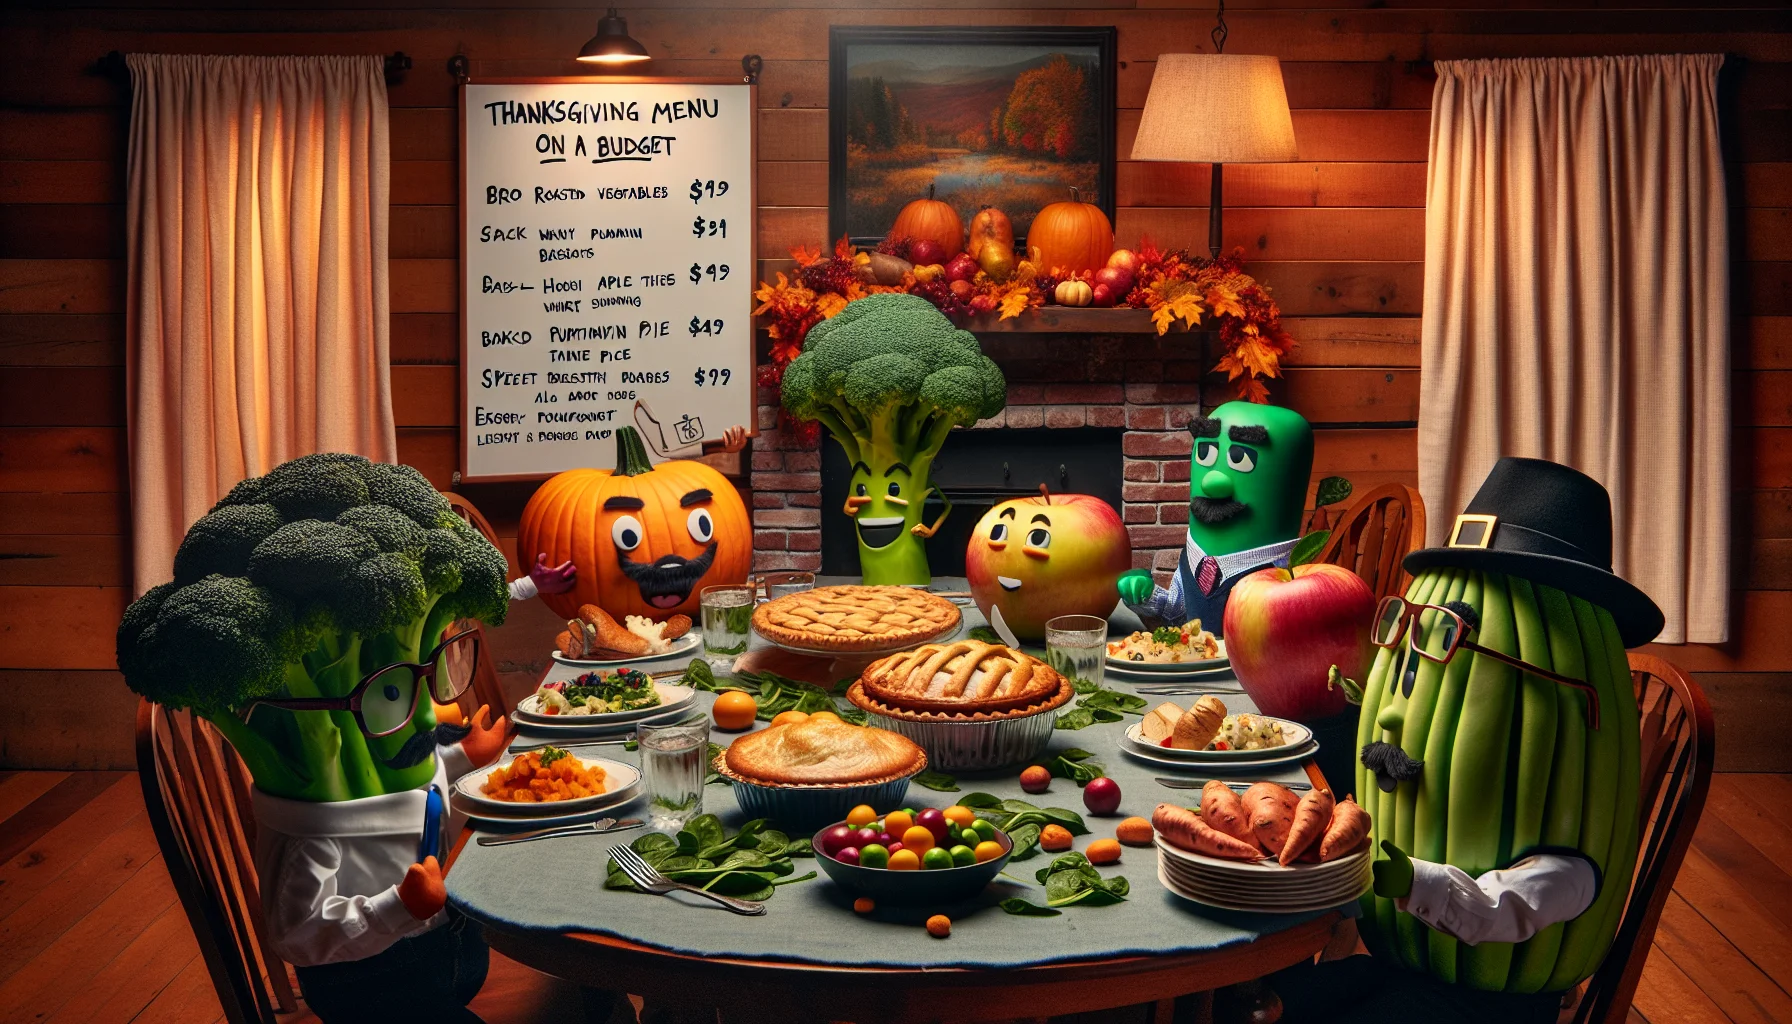 A warmly lit, rustic dining room decorated with fall colors. Around a long wooden table laden with Thanksgiving-inspired dishes are anthropomorphic fruits and vegetables playfully acting out a 'heist' scenario. A broccoli 'mastermind' with glasses and a faux mustache is haggling with a burly sweet potato 'banker' over price tags. Mischievous apple 'thieves' are trying to sneak away with a pumpkin pie, but a spinach 'cop' is about to catch them. A whiteboard hangs on the wall highlighting 'Thanksgiving Menu on a Budget', emphasizing less expensive but healthy options like roasted vegetables, whole wheat stuffing, and fruit desserts.